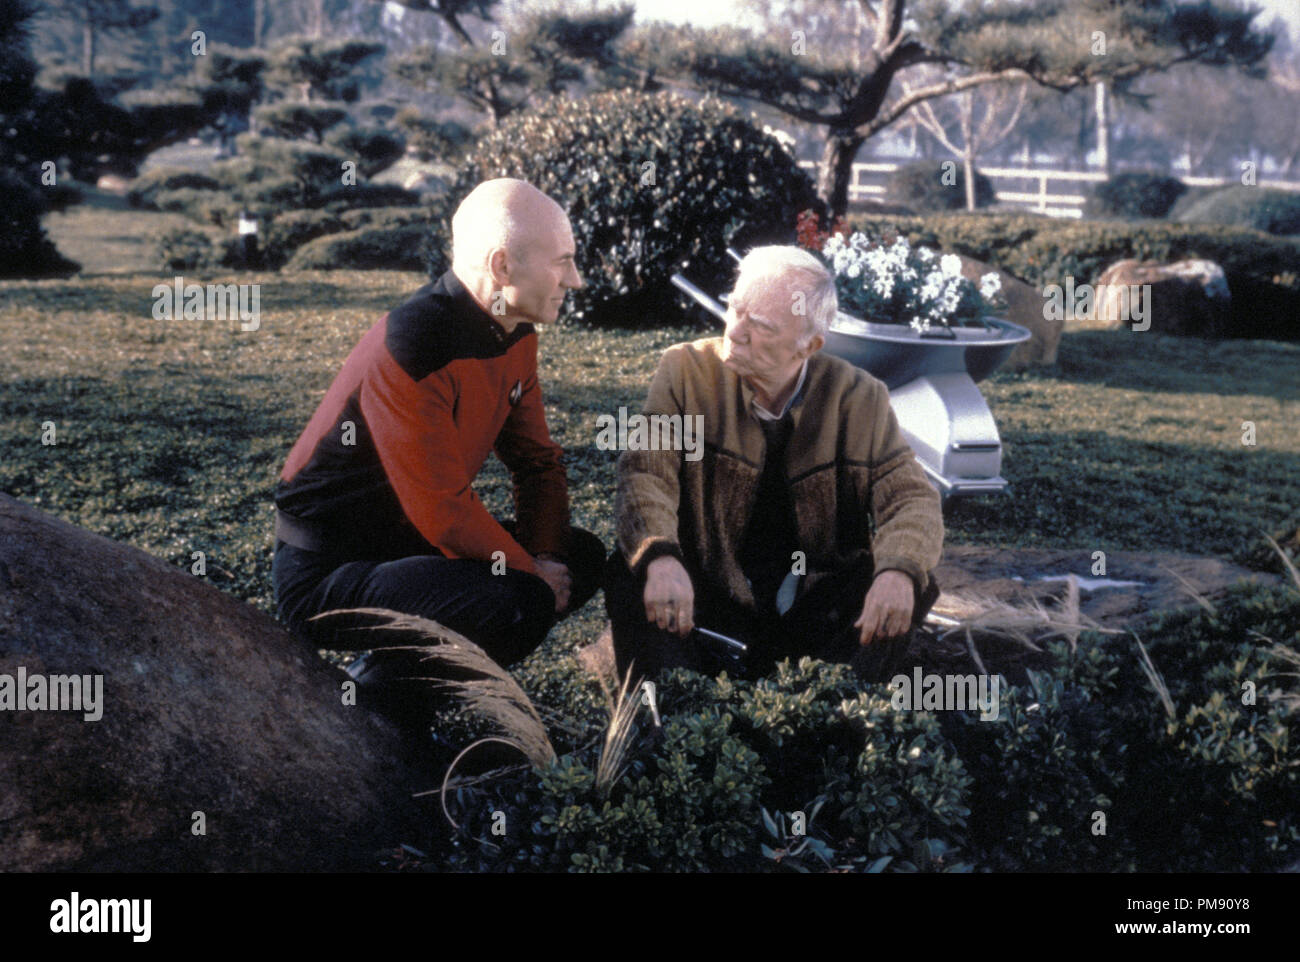 Film still or Publicity still from 'Star Trek: The Next Generation' Patrick Stewart, Ray Walston © 1991 Paramount All Rights Reserved   File Reference # 31527020THA  For Editorial Use Only Stock Photo